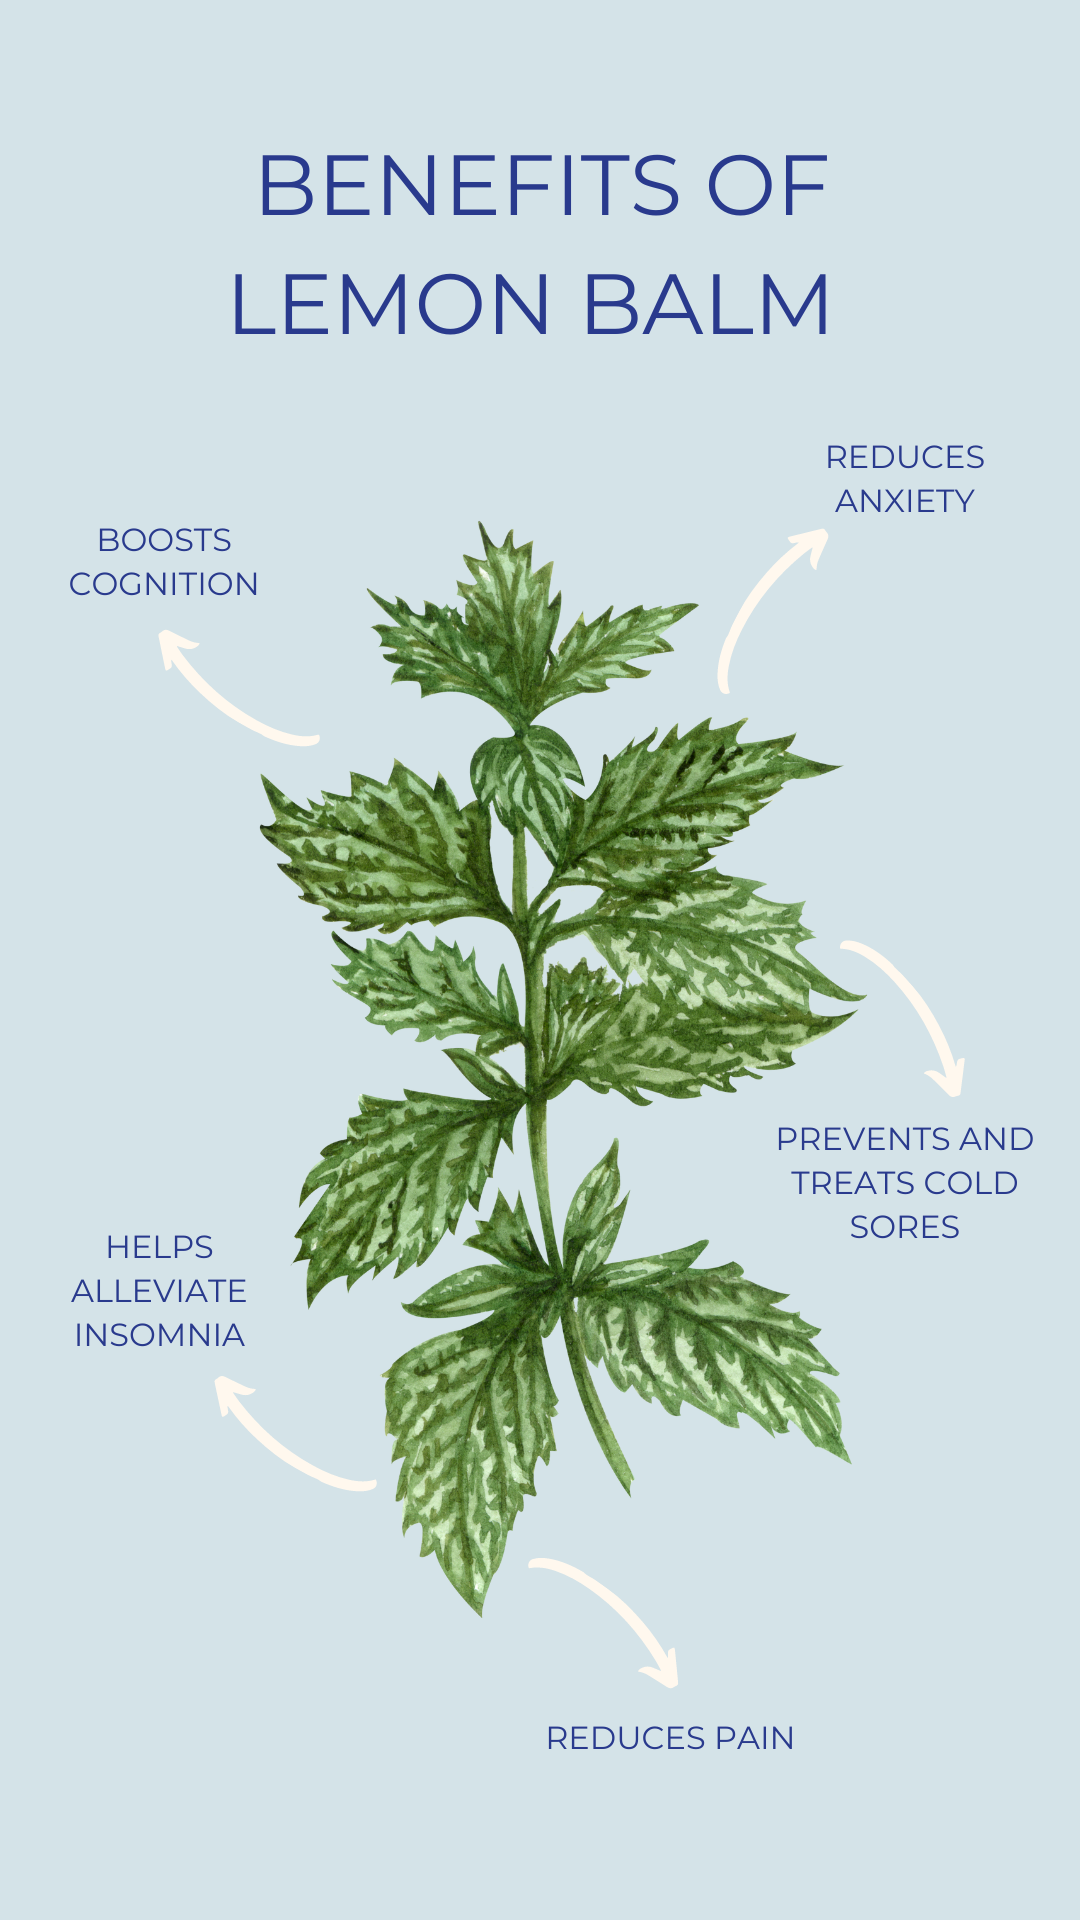 Lemon Balm Benefits for the Body and Mind